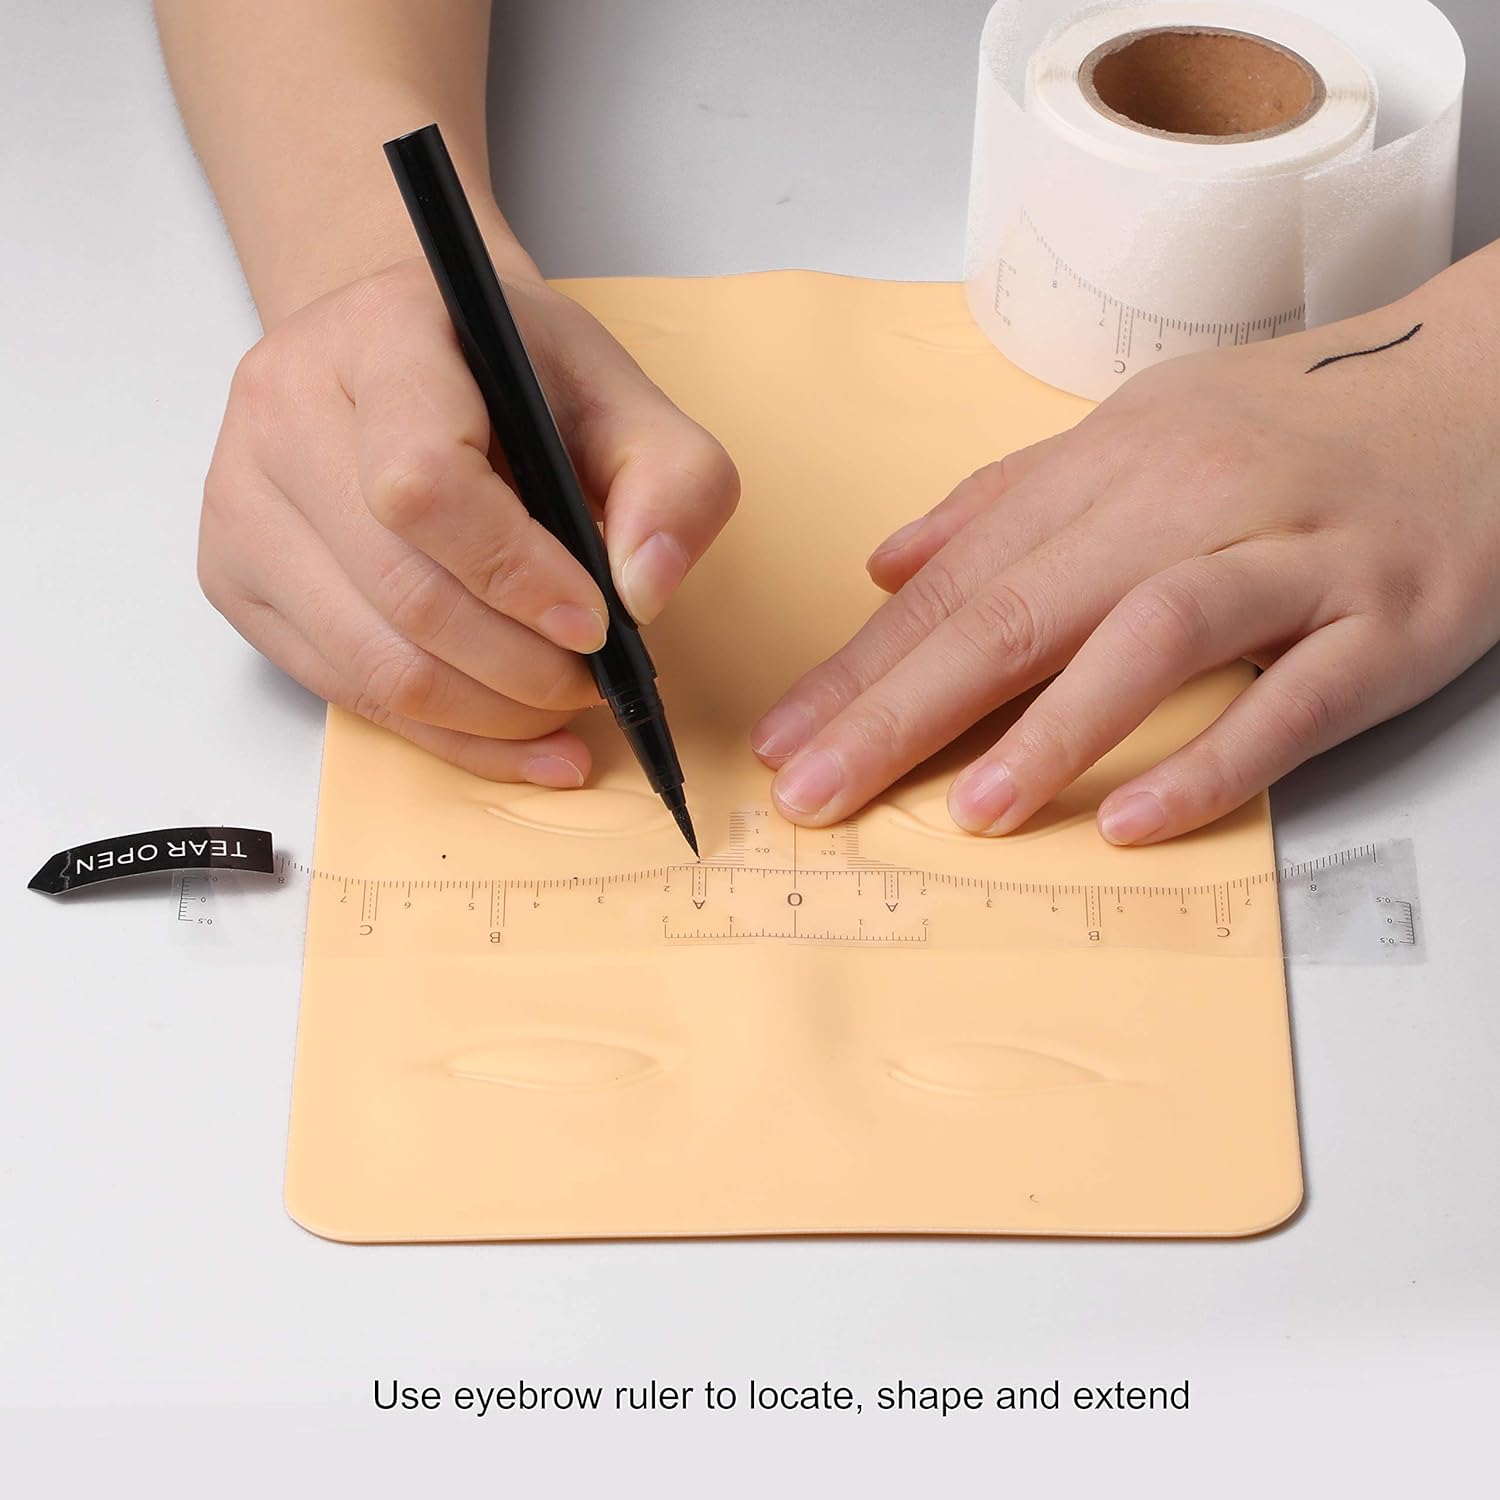 use eyebrow ruler to locate, shape and extend